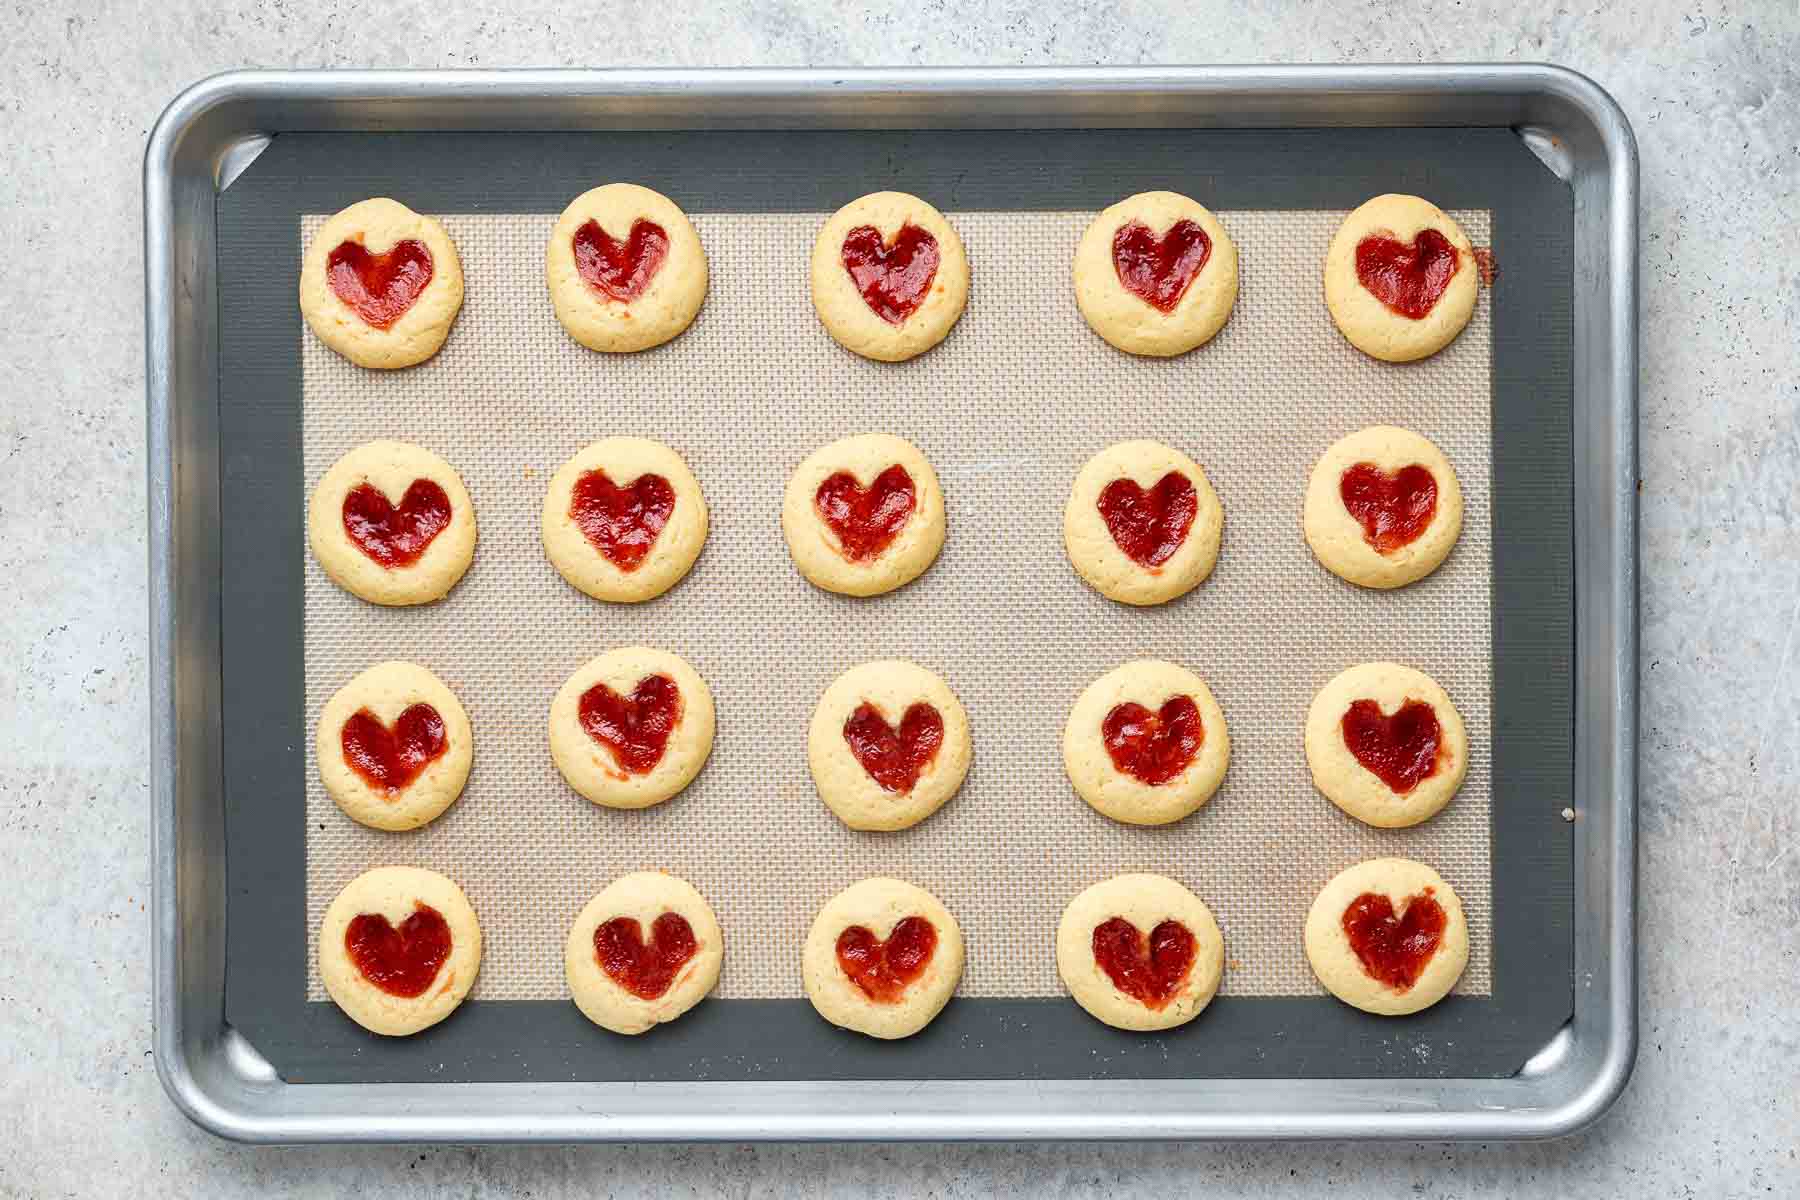 Strawberry jam cookies with hearts in the center on baking sheet.